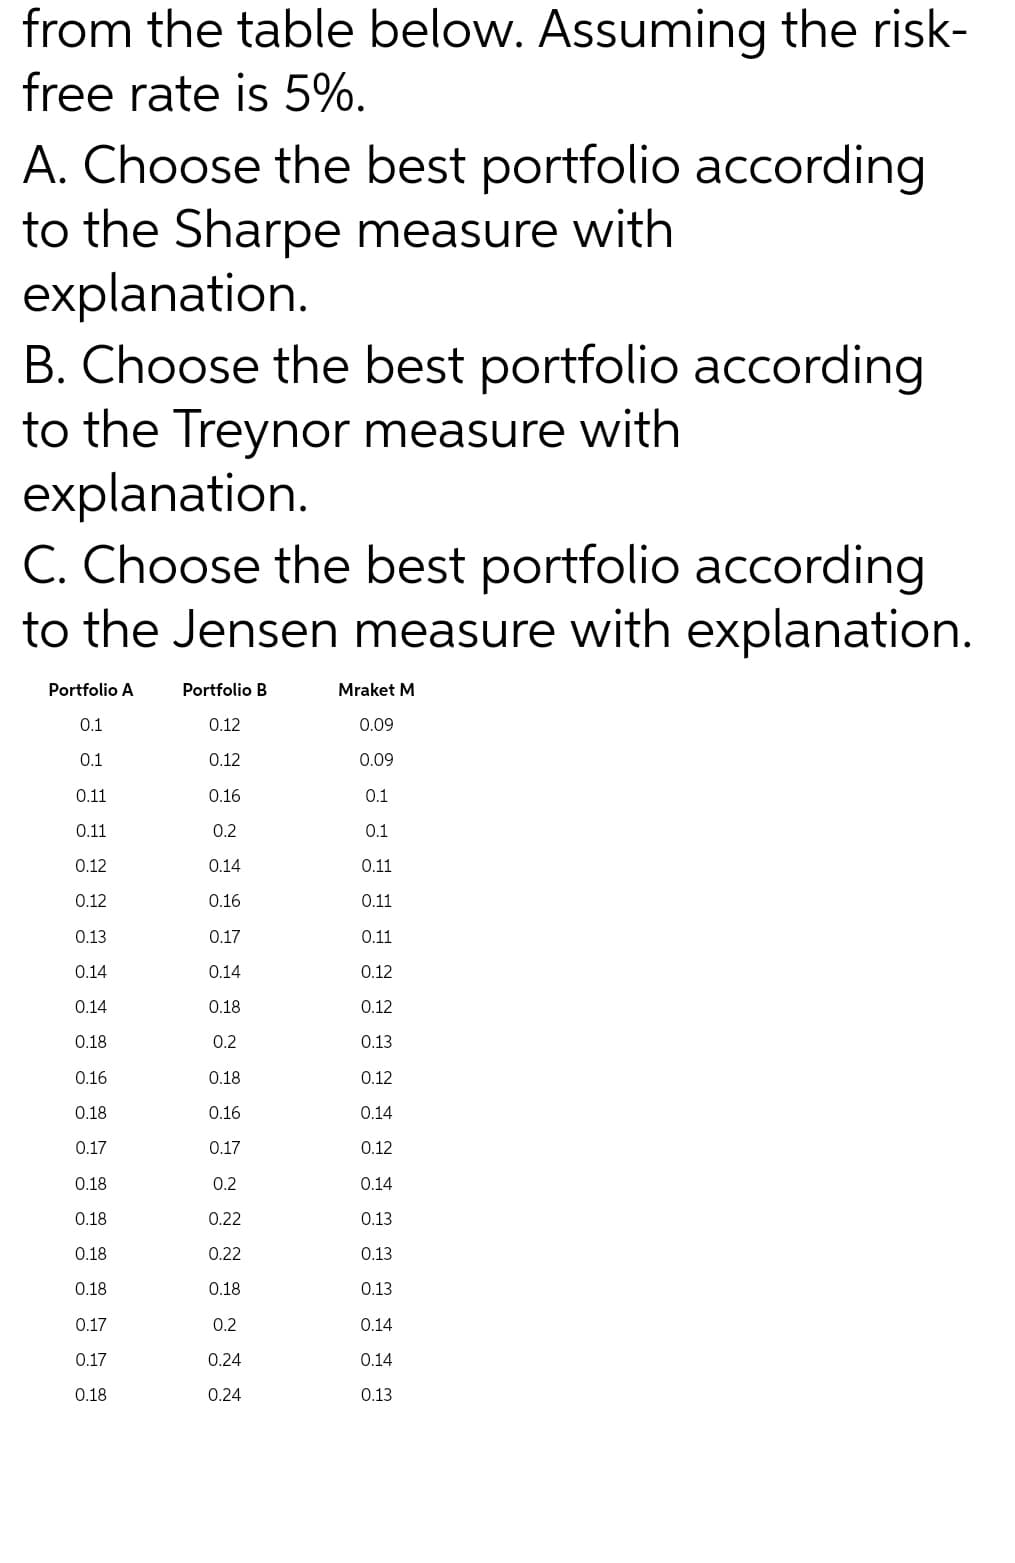 from the table below. Assuming the risk-
free rate is 5%.
A. Choose the best portfolio according
to the Sharpe measure with
explanation.
B. Choose the best portfolio according
to the Treynor measure with
explanation.
C. Choose the best portfolio according
to the Jensen measure with explanation.
Portfolio A
0.1
0.1
0.11
0.11
0.12
0.12
0.13
0.14
0.14
0.18
0.16
0.18
0.17
0.18
0.18
0.18
0.18
0.17
0.17
0.18
Portfolio B
0.12
0.12
0.16
0.2
0.14
0.16
0.17
0.14
0.18
0.2
0.18
0.16
0.17
0.2
0.22
0.22
0.18
0.2
0.24
0.24
Mraket M
0.09
0.09
0.1
0.1
0.11
0.11
0.11
0.12
0.12
0.13
0.12
0.14
0.12
0.14
0.13
0.13
0.13
0.14
0.14
0.13